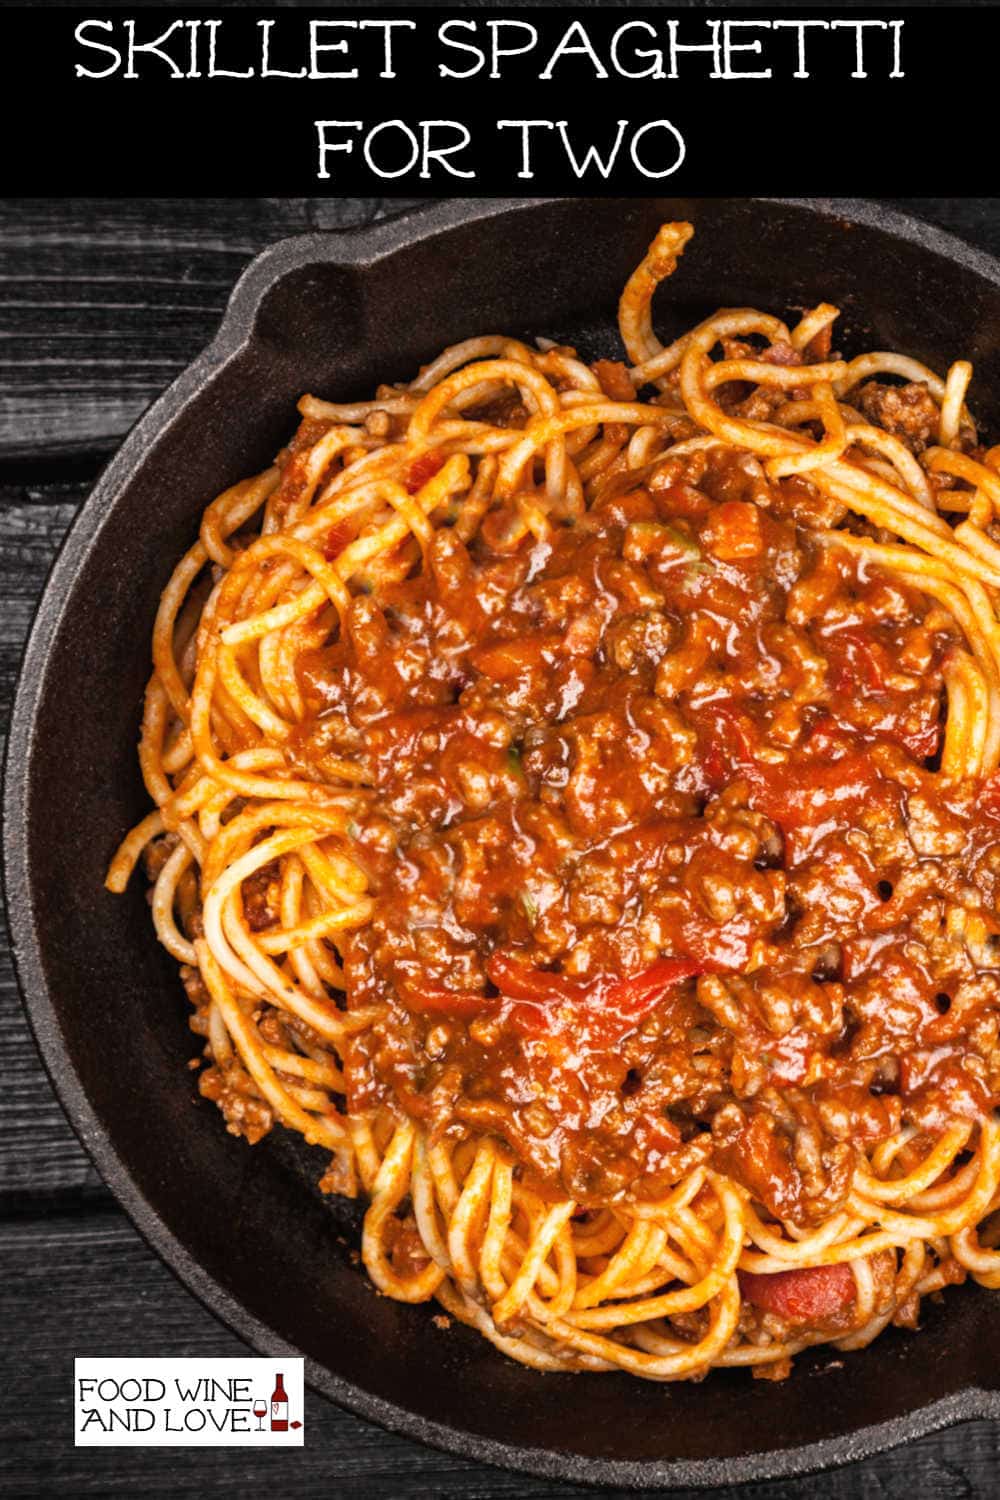 Spaghetti topped with extra meaty sauce served in skillet. 